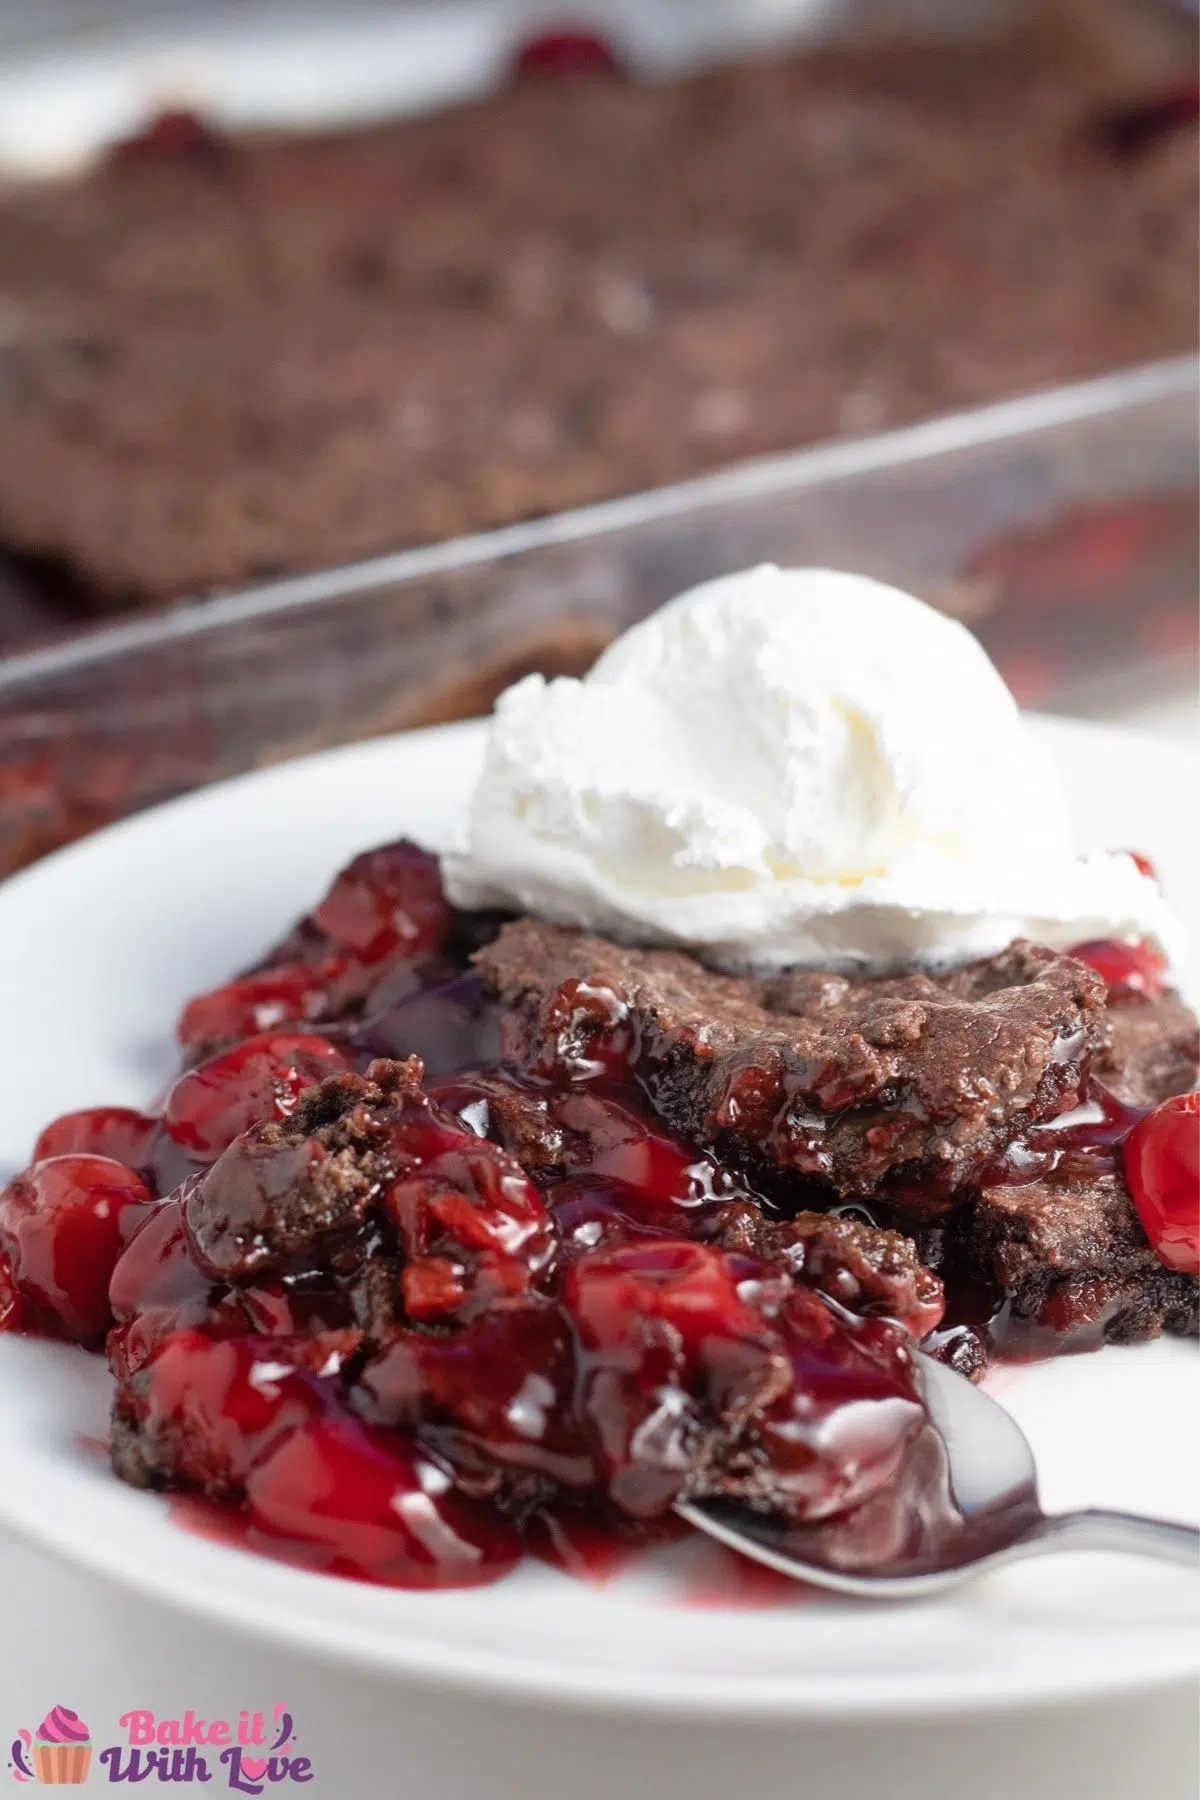 Tall image of the chocolate cherry dump cake served on plate with the baking dish in background.